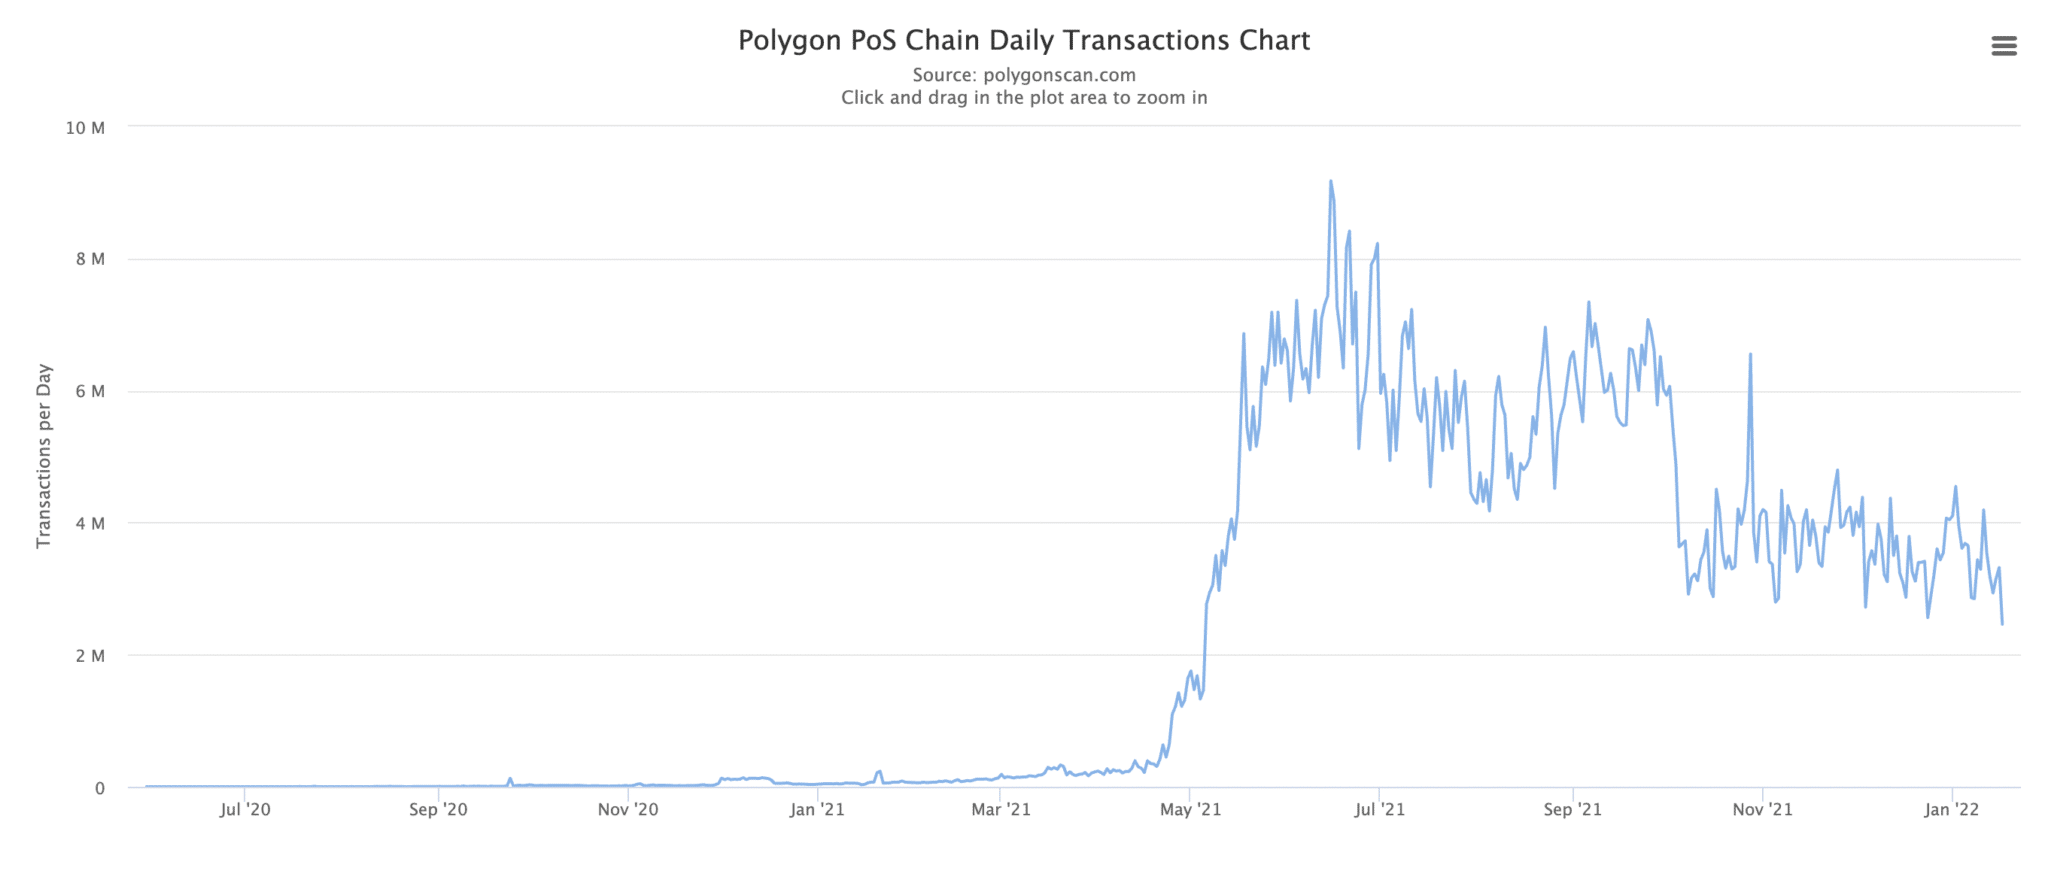 Polygon PoS Chain Daily Transactions (Source: snowtrace.io)